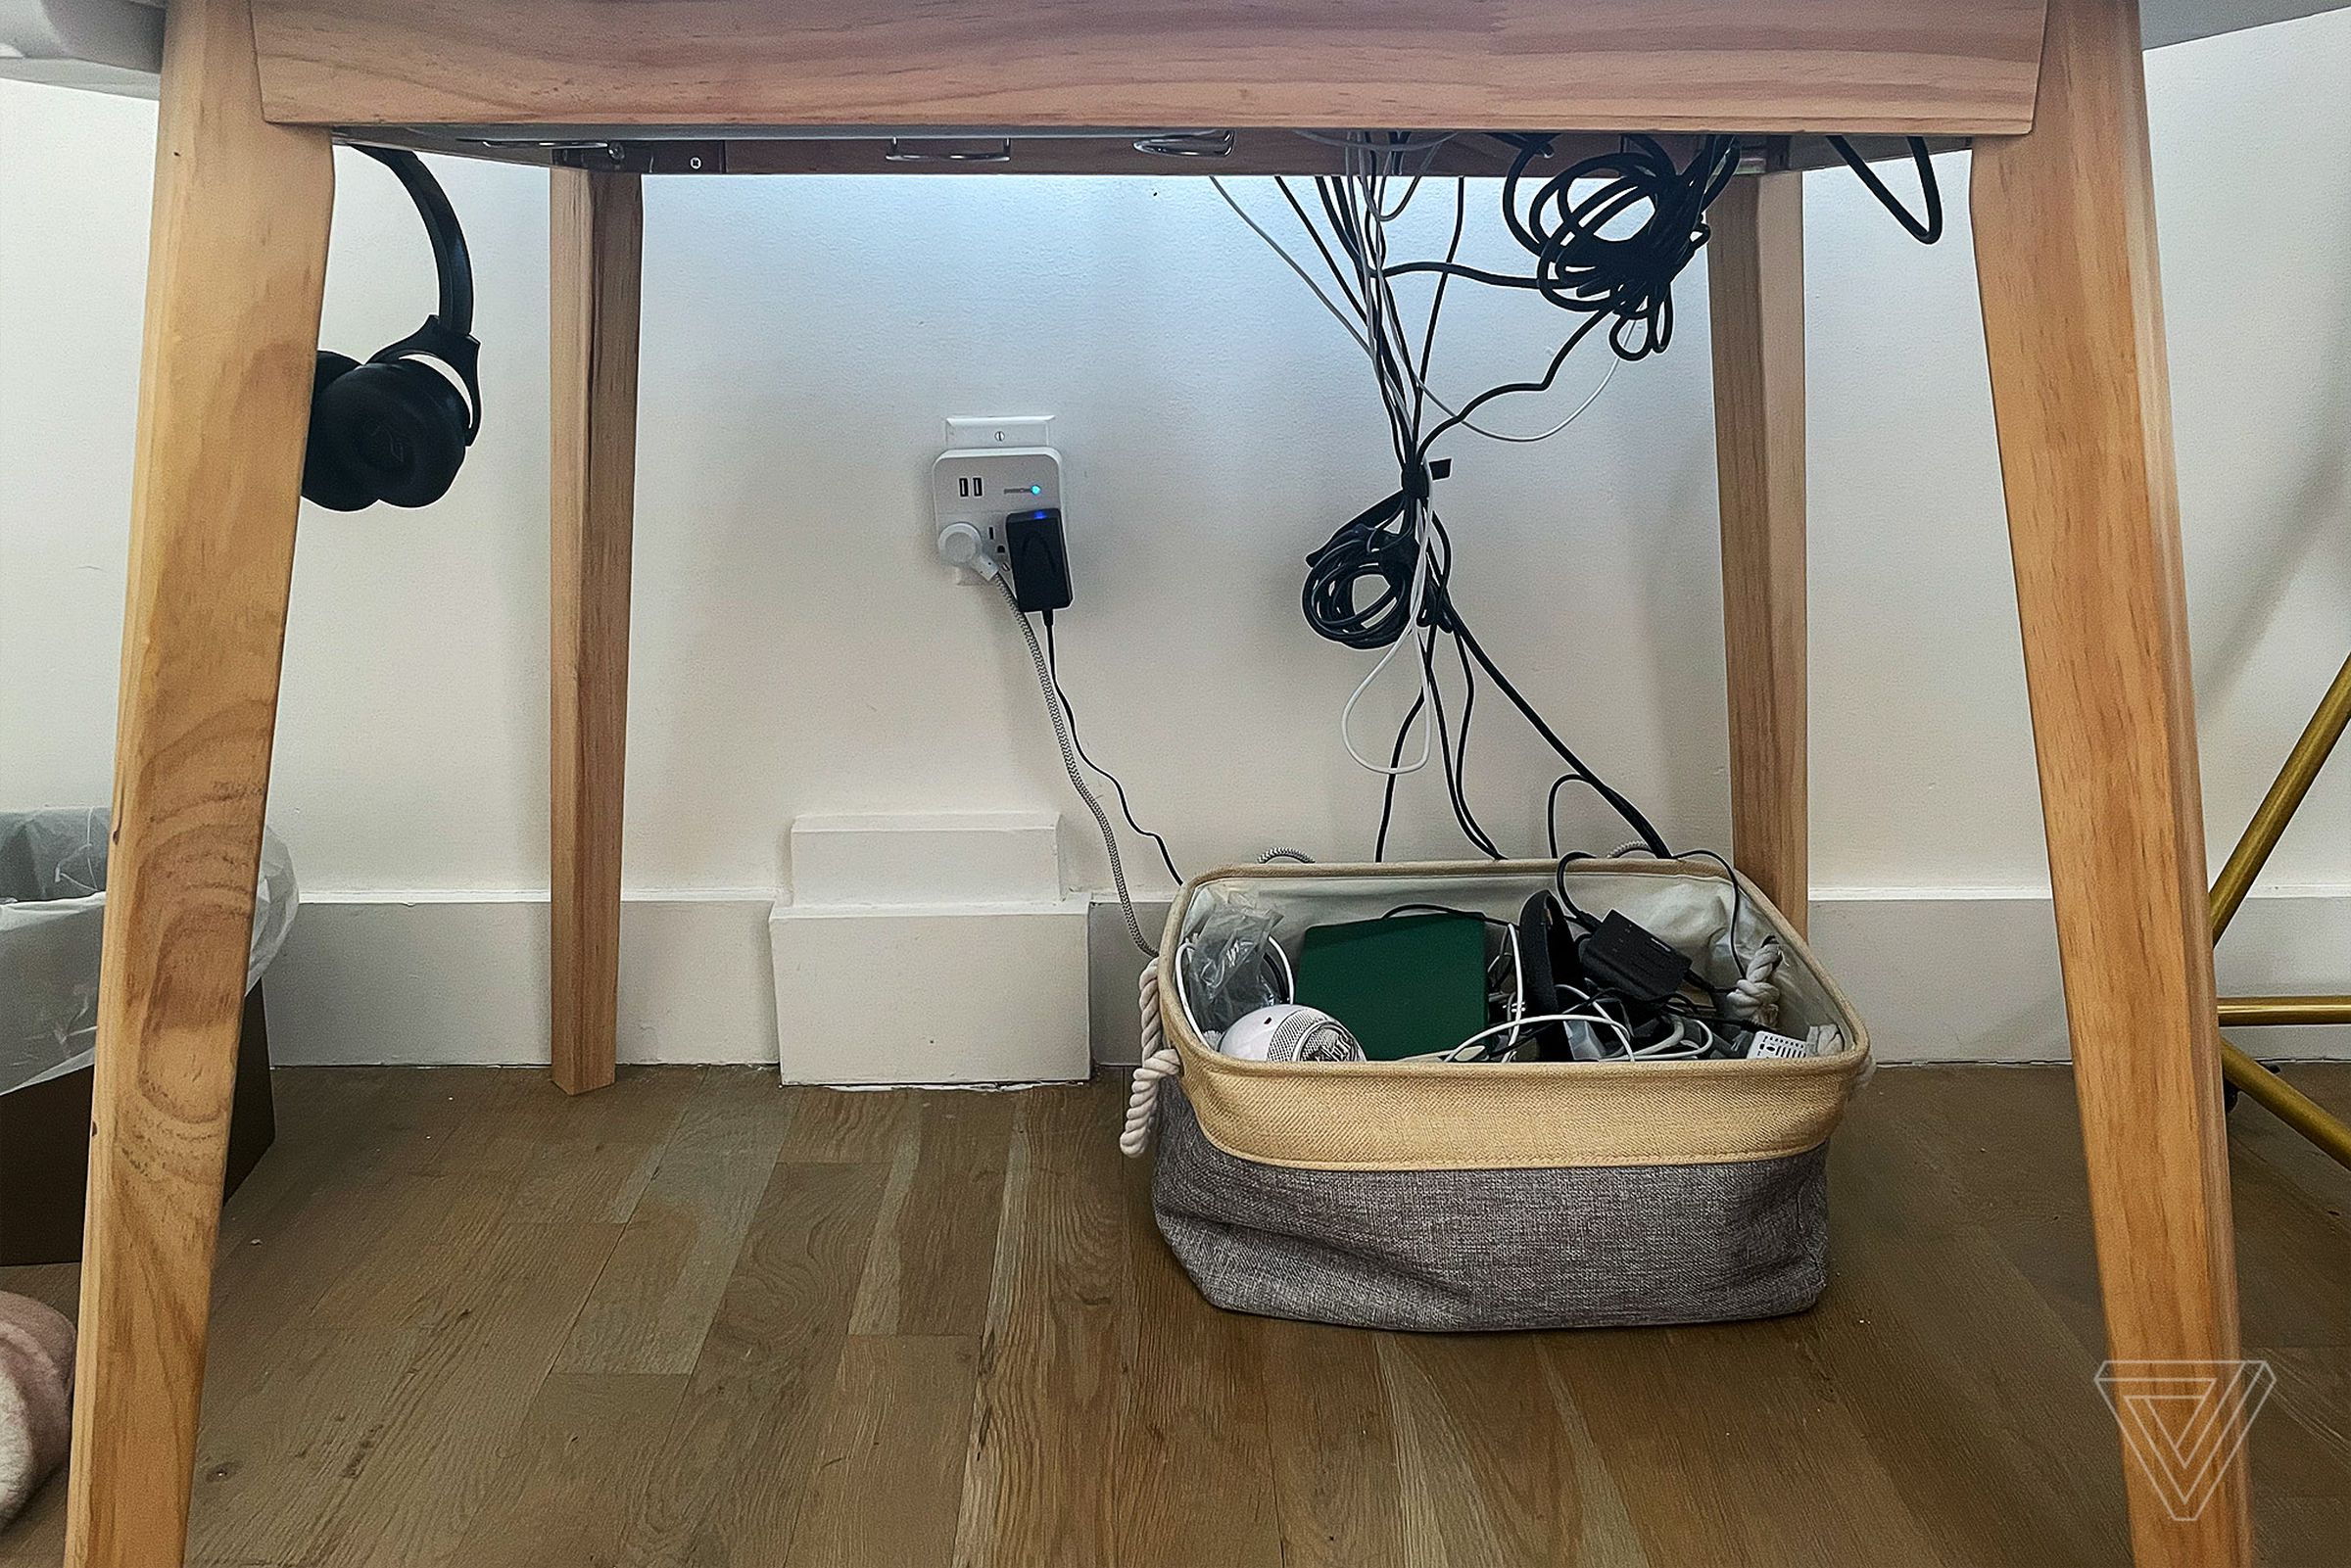 A basket for cables...